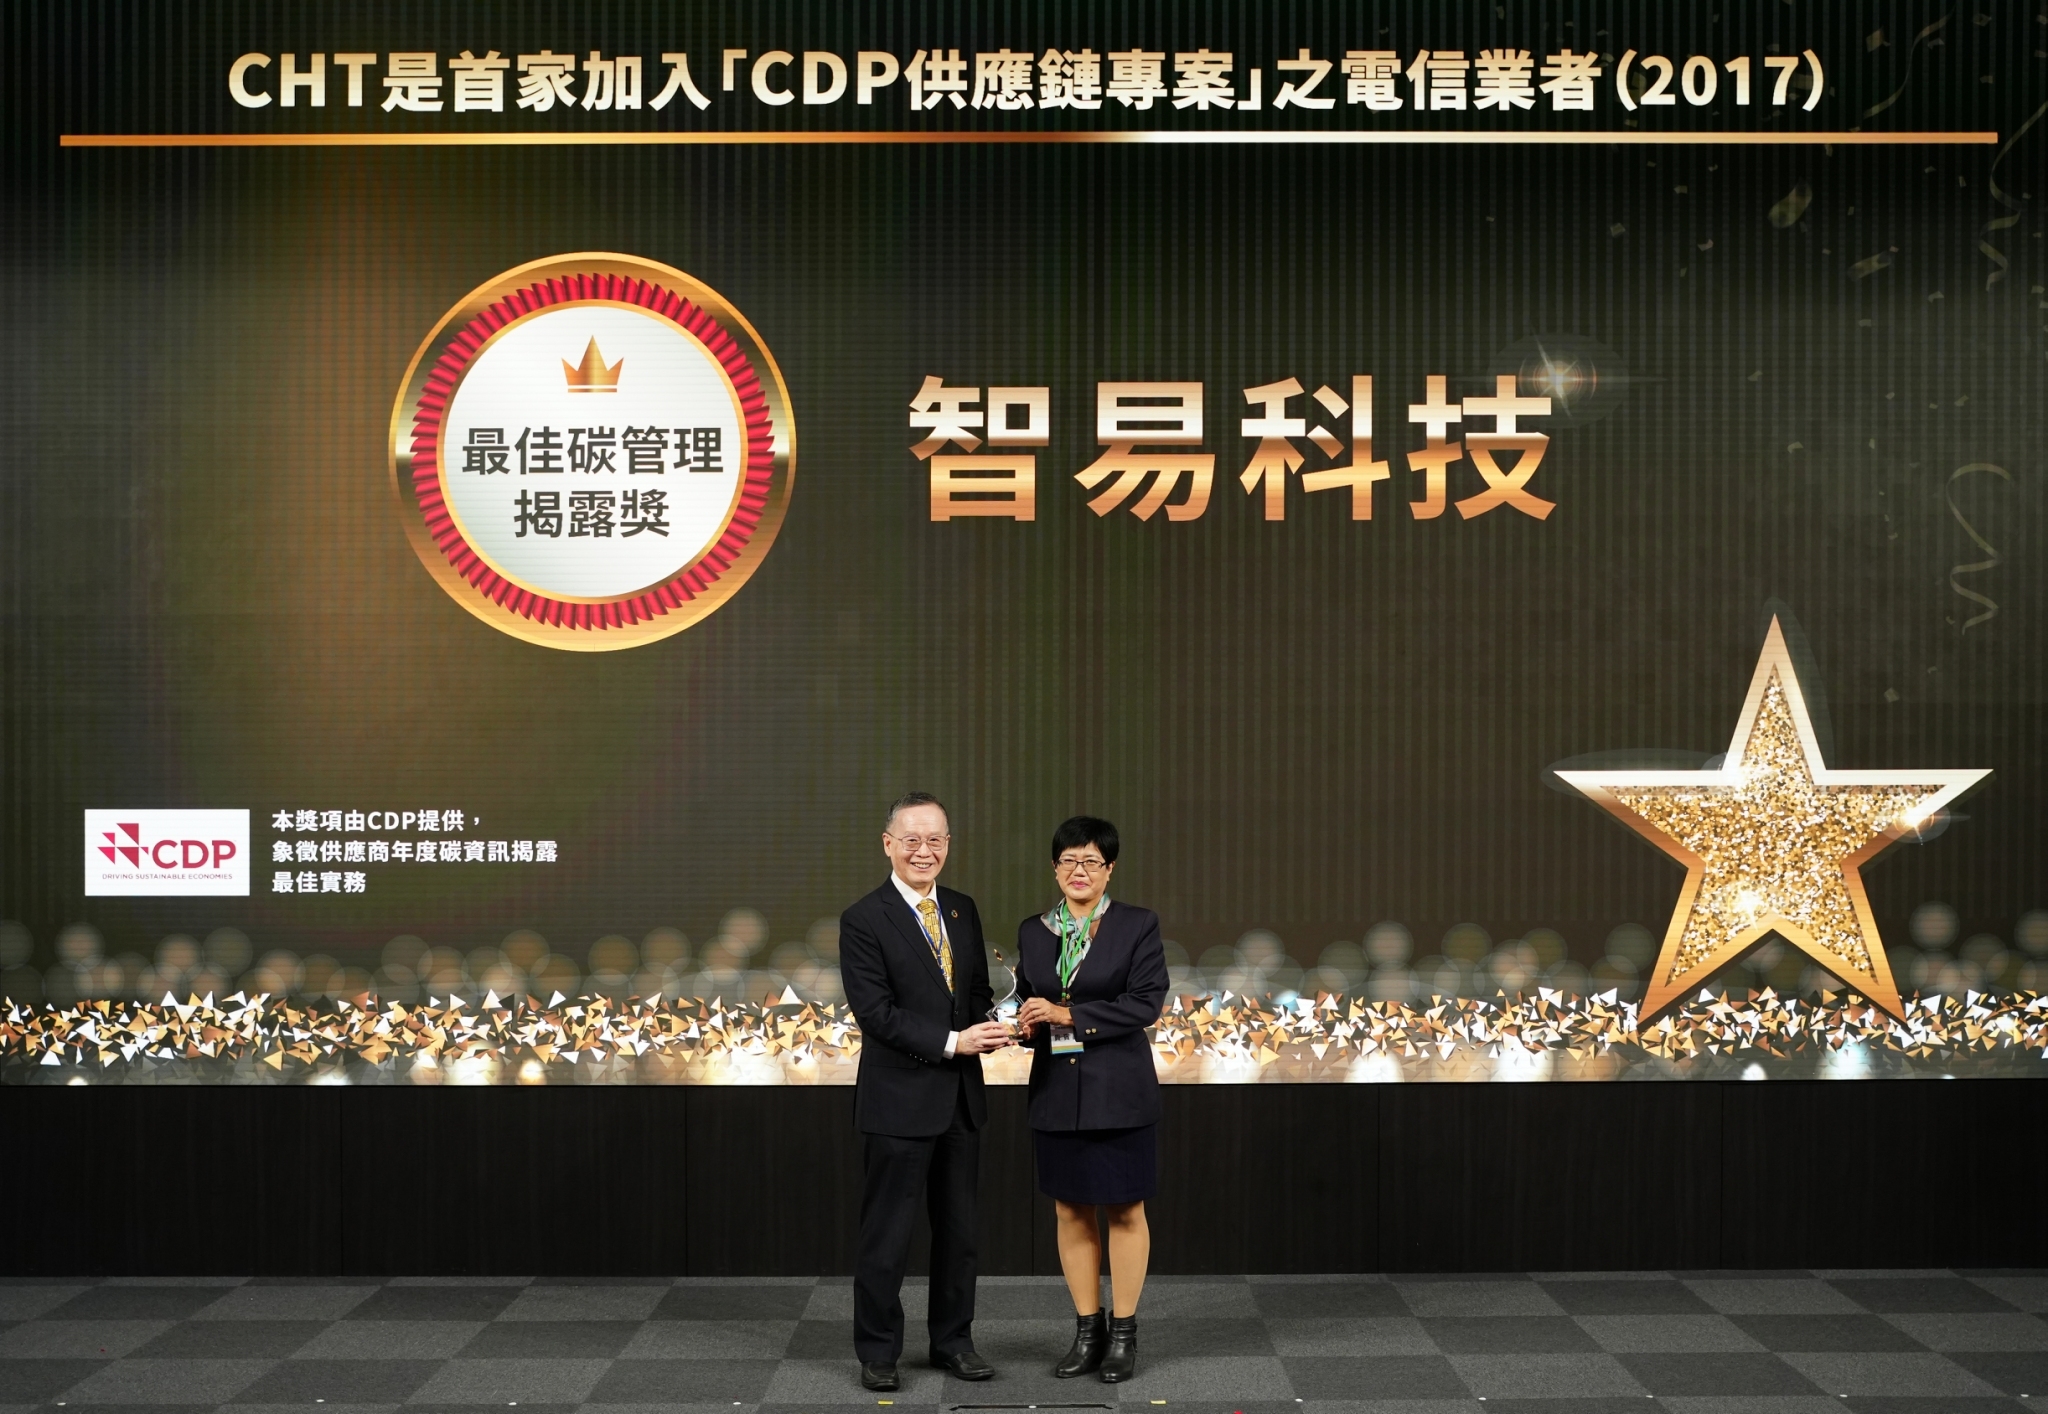 Arcadyan presented with Best CDP Carbon Disclosure Award from CHT.